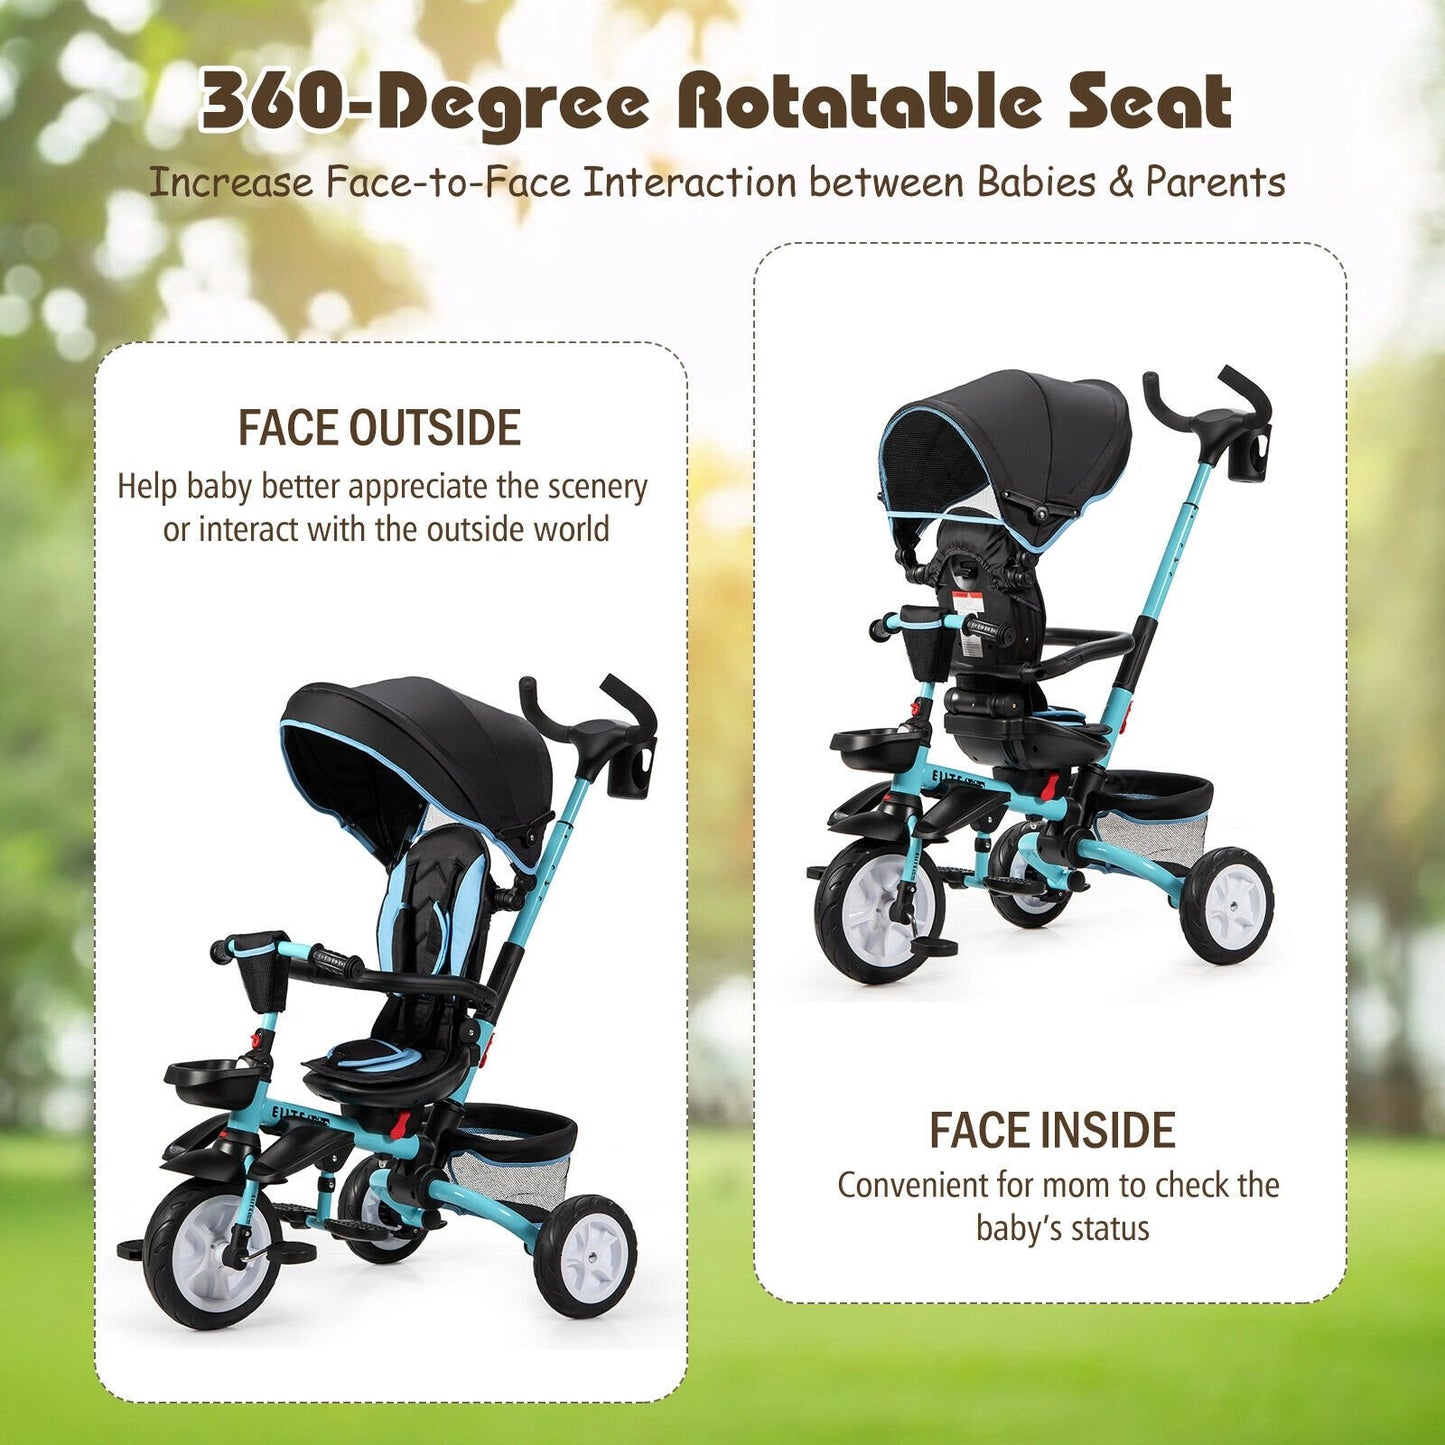 6-in-1 Detachable Kids Baby Stroller Tricycle with Canopy and Safety Harness, Blue